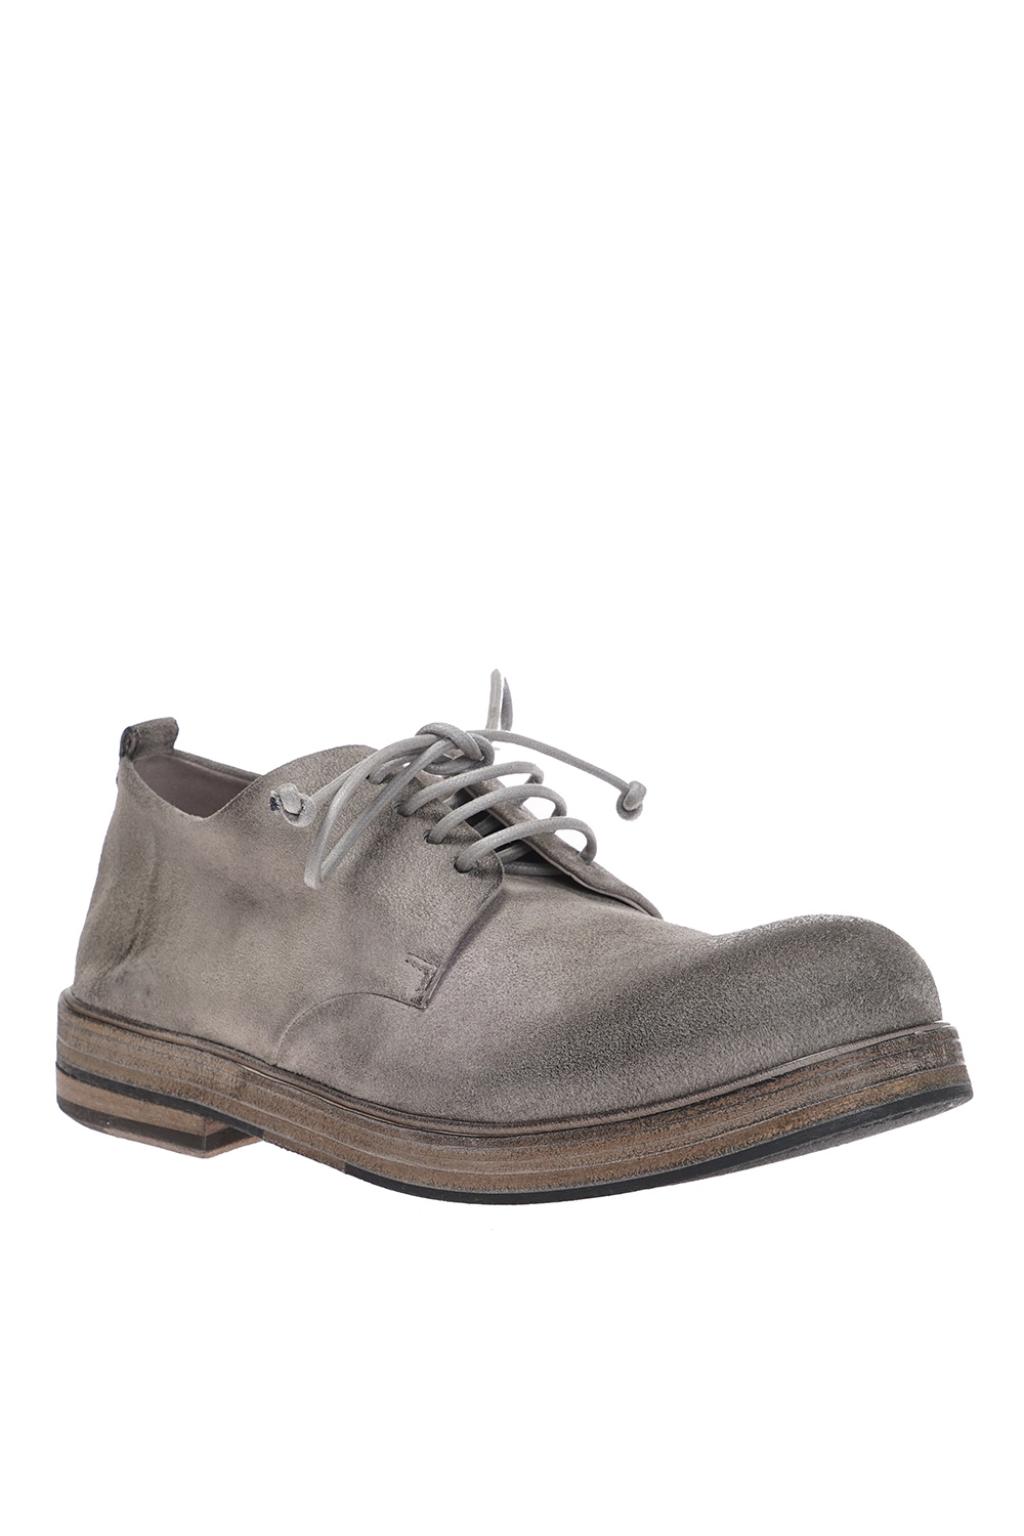 Marsell Lace-up suede shoes | Men's Shoes | Vitkac